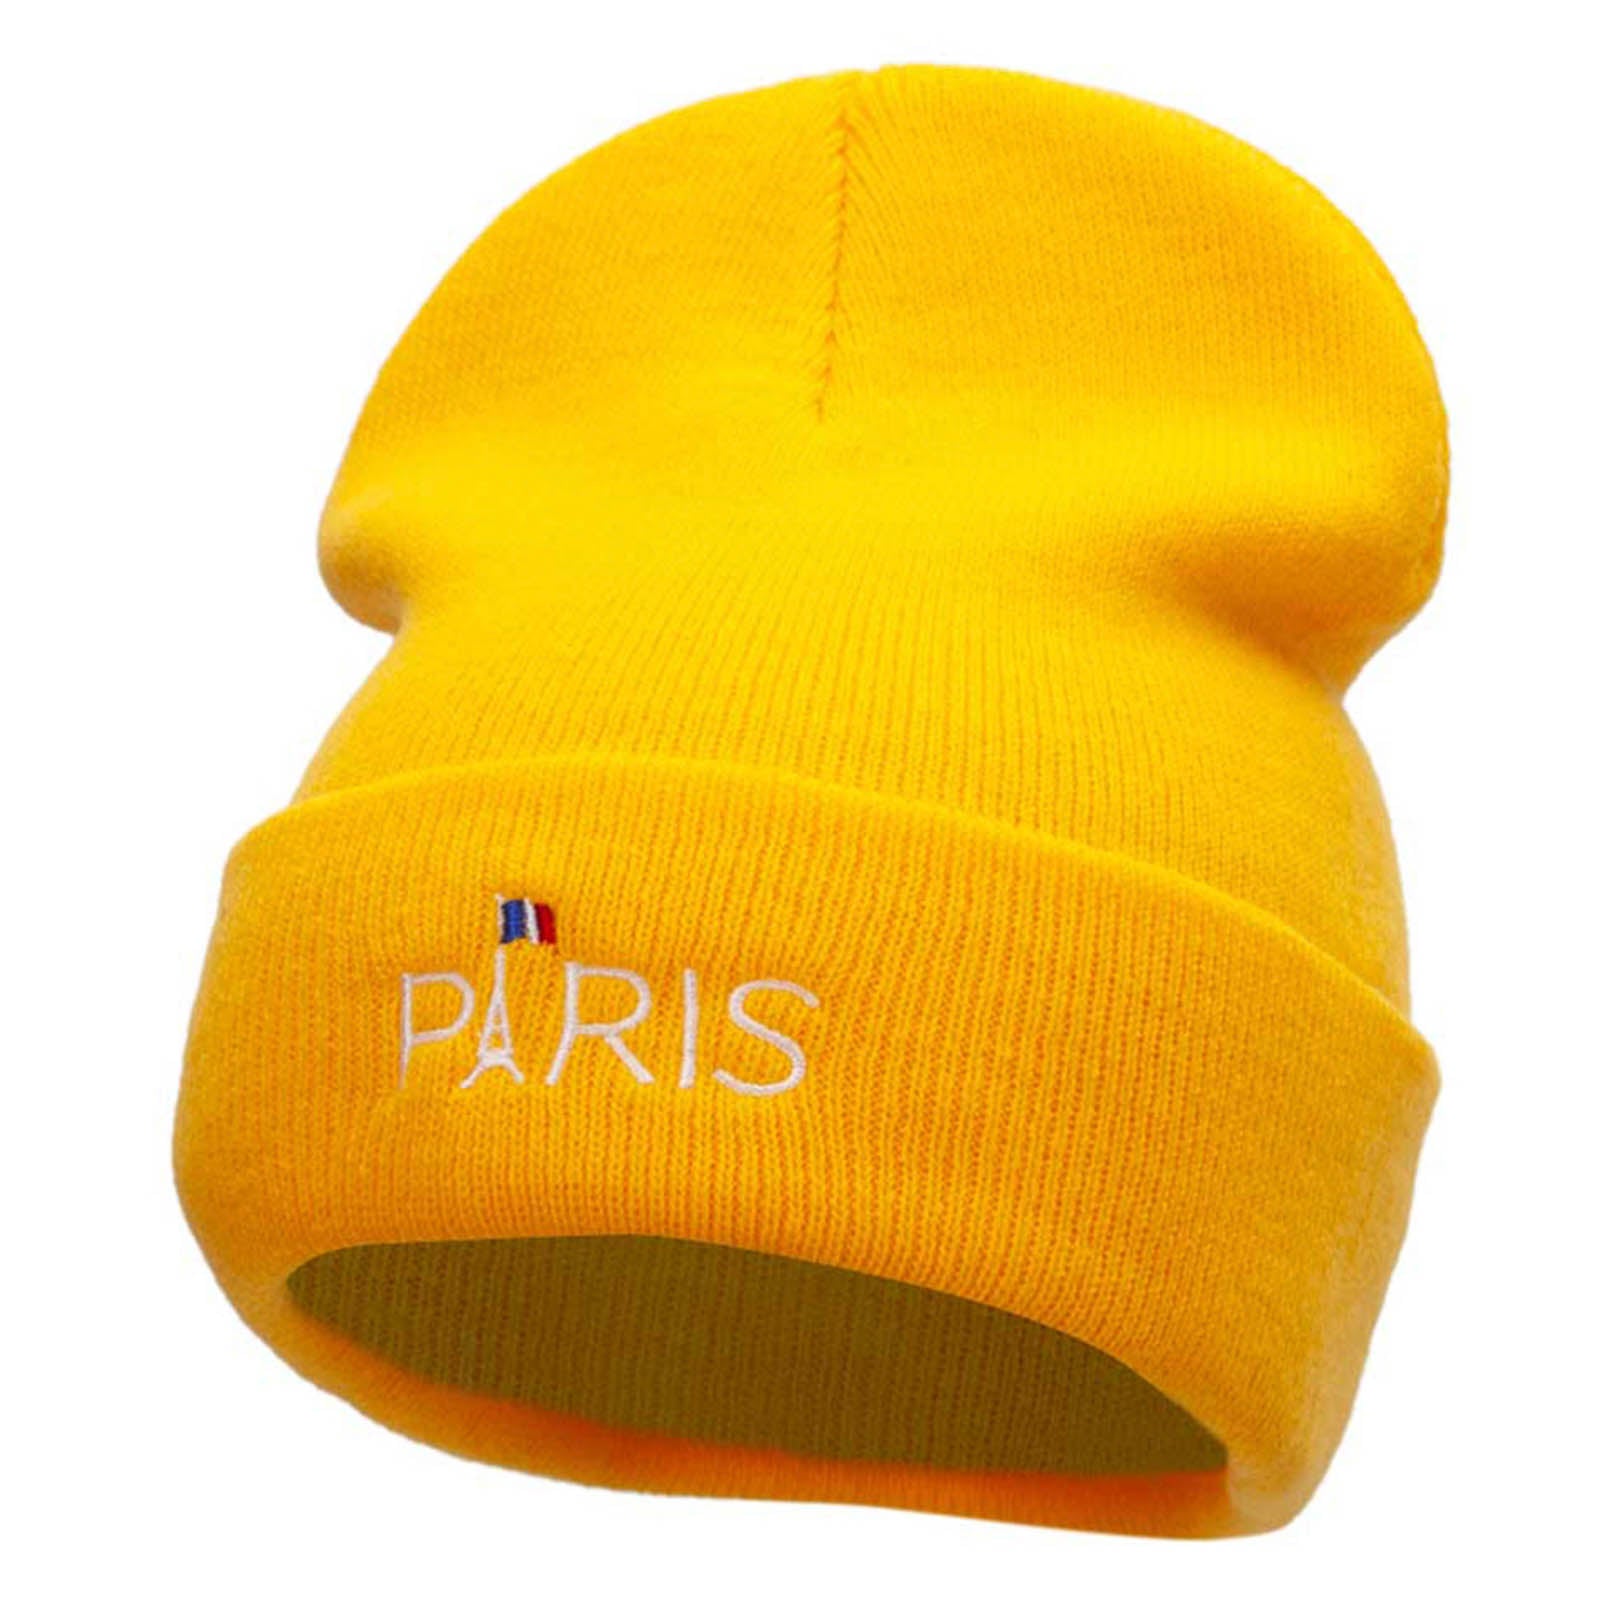 Eiffle Tower Paris Embroidered 12 Inch Long Knitted Beanie - Yellow OSFM